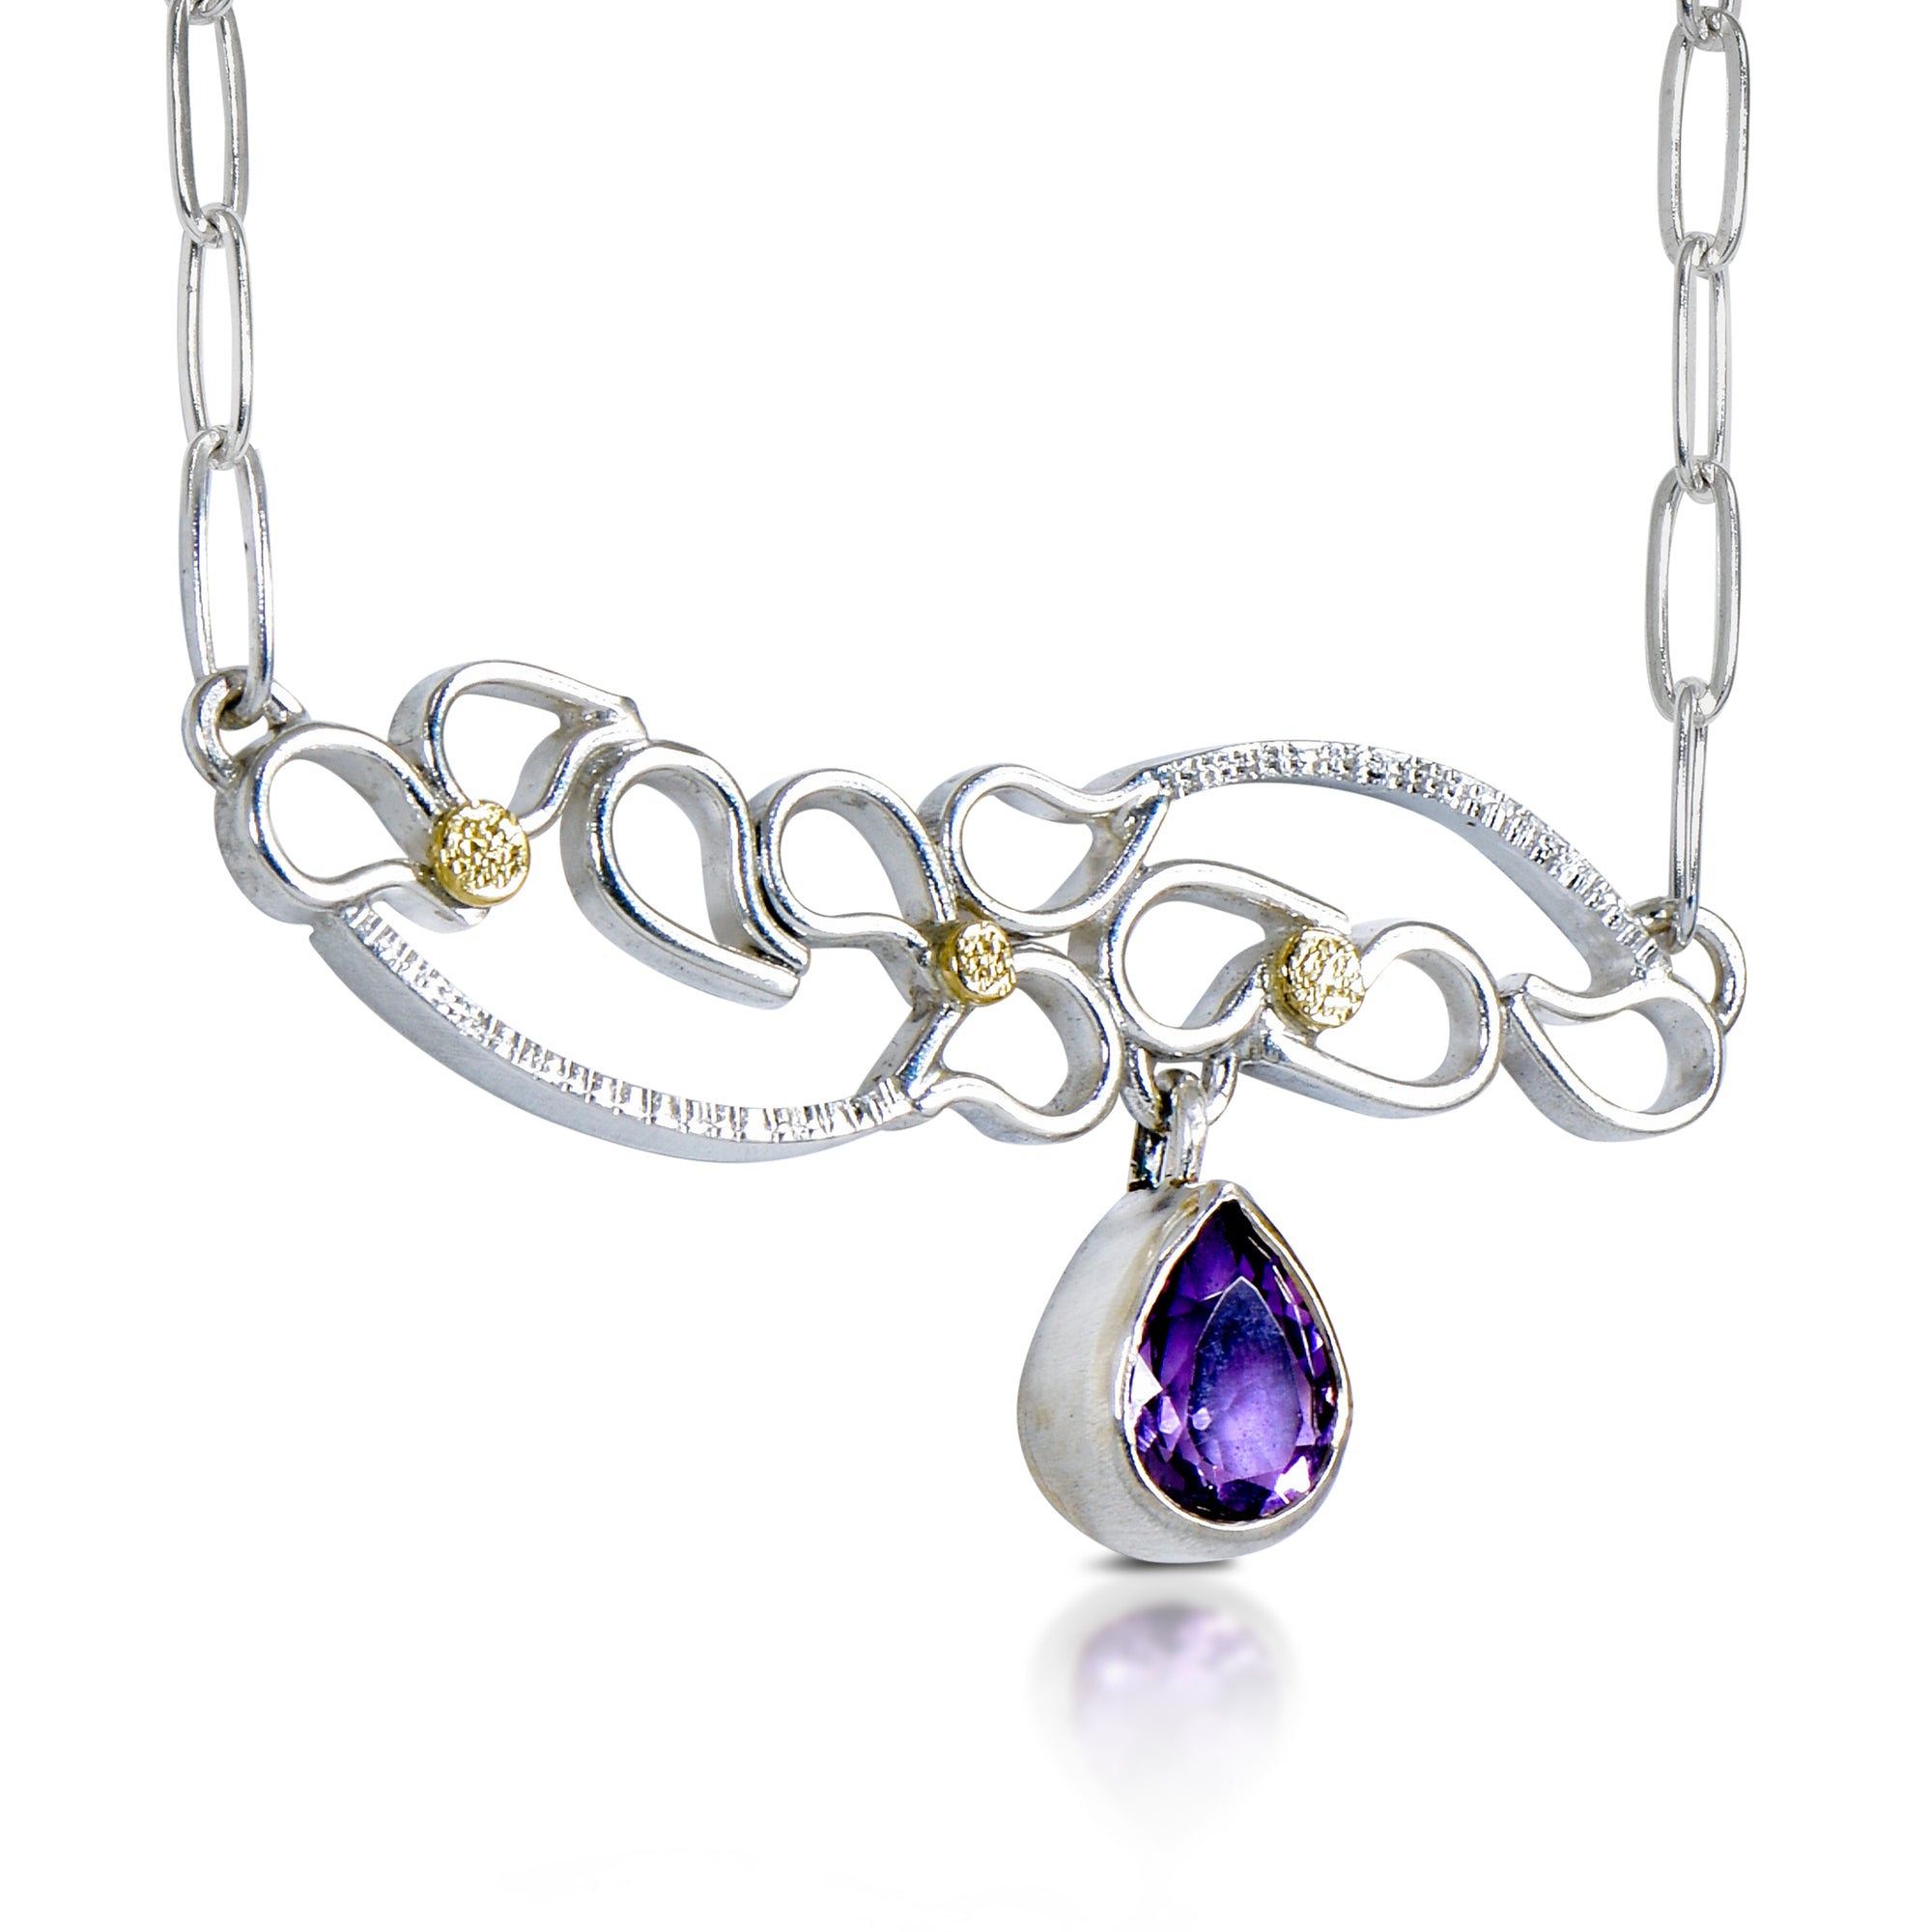 Wide Stream Necklace with Amethyst Drop